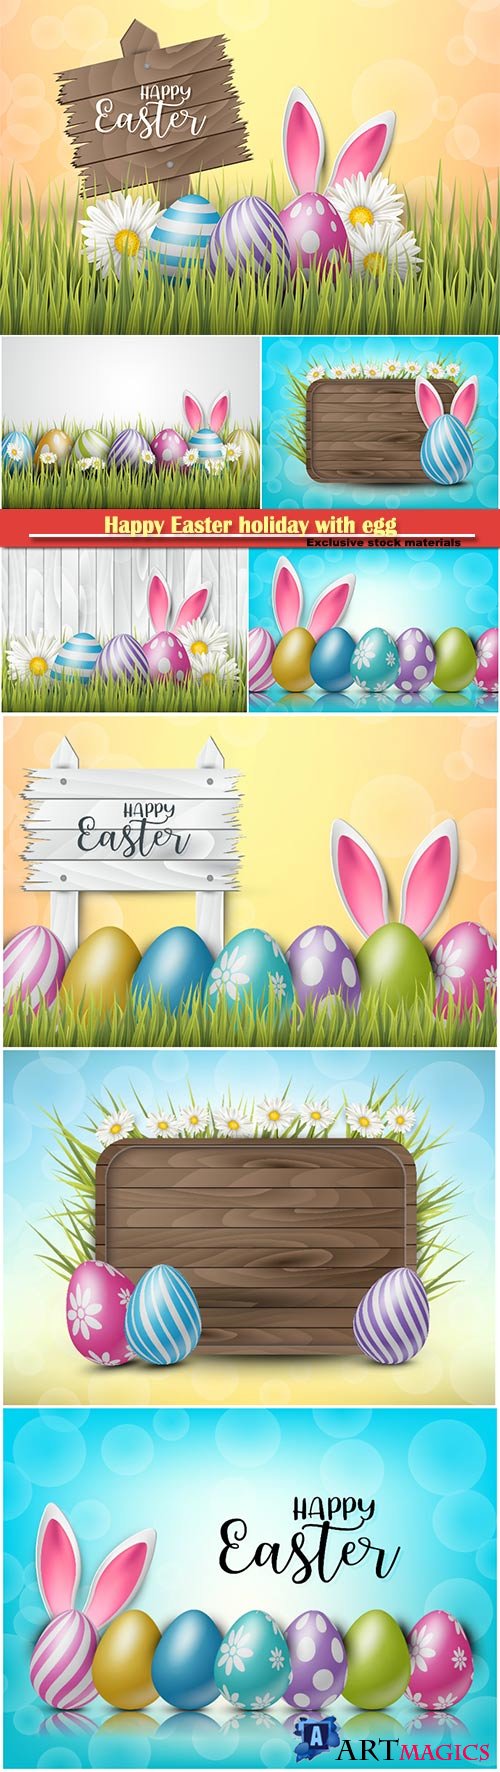 Happy Easter holiday with egg and spring flower vector illustration # 6